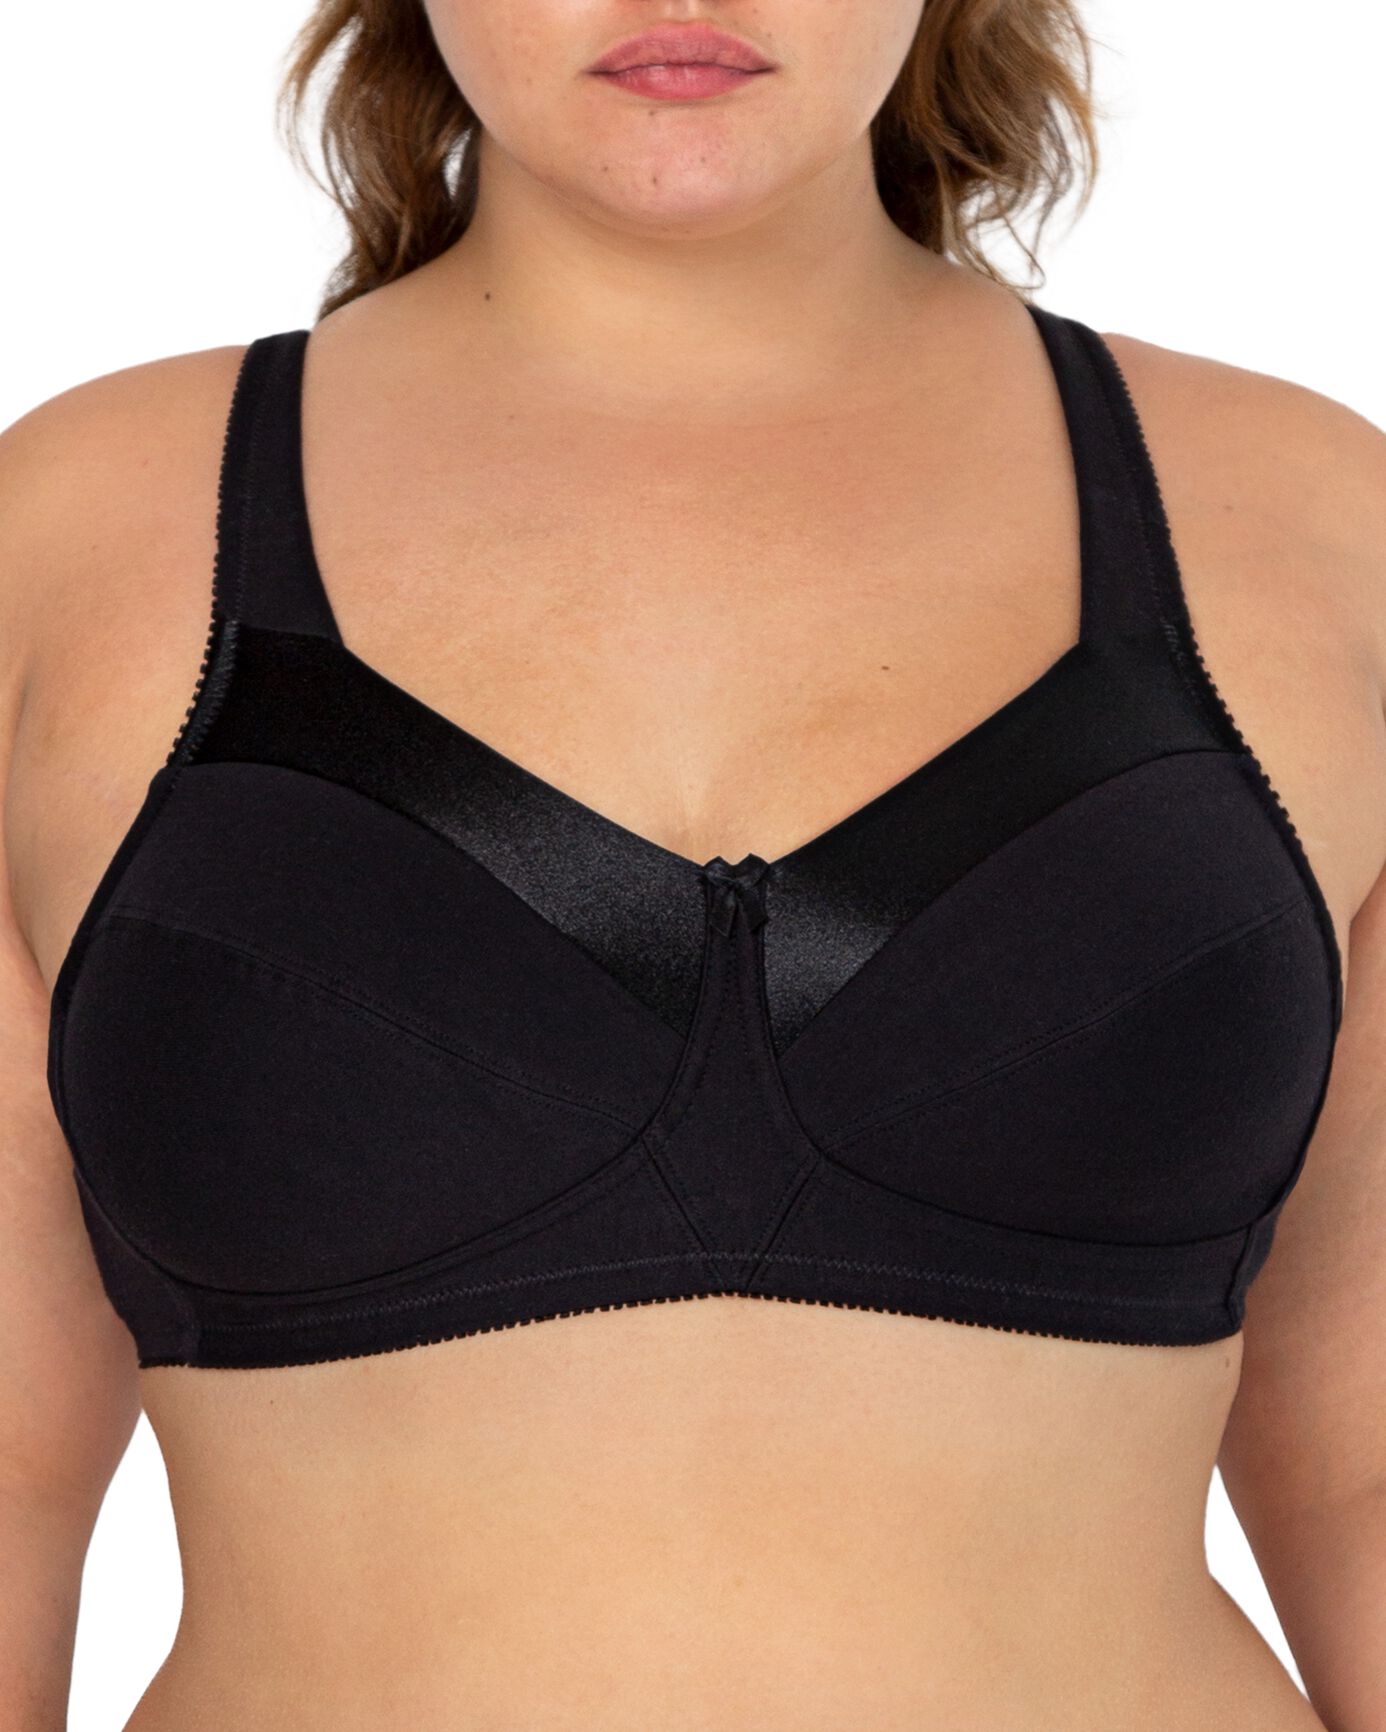 Fruit of the Loom Women's Wirefree Cotton Bralette 2-Pack Black/White 38D